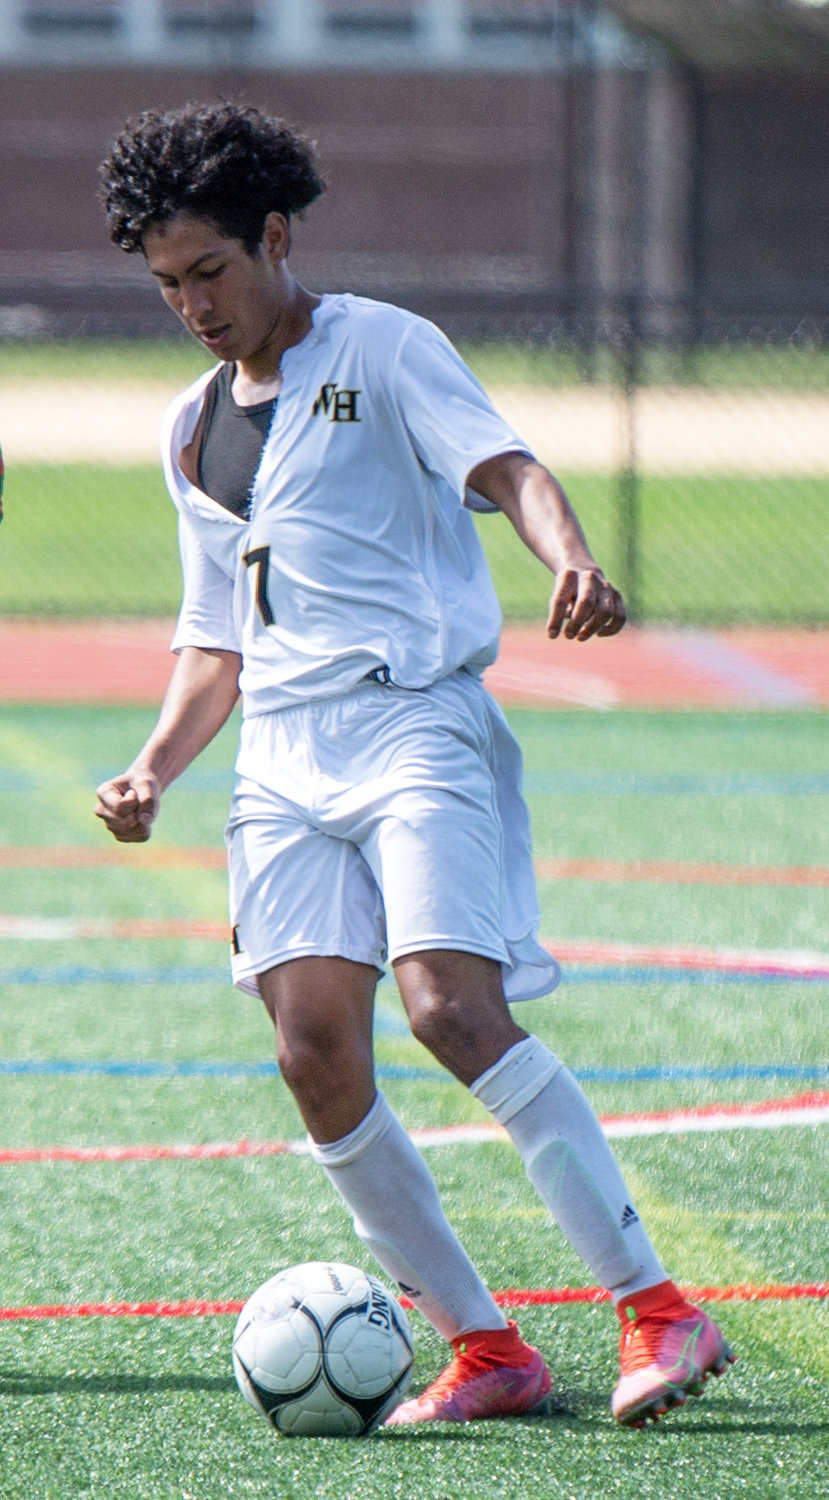 Senior Derek Chinchilla scored twice in each of West Hempstead's final two regular-season games and has a team-leading 8 goals this fall.